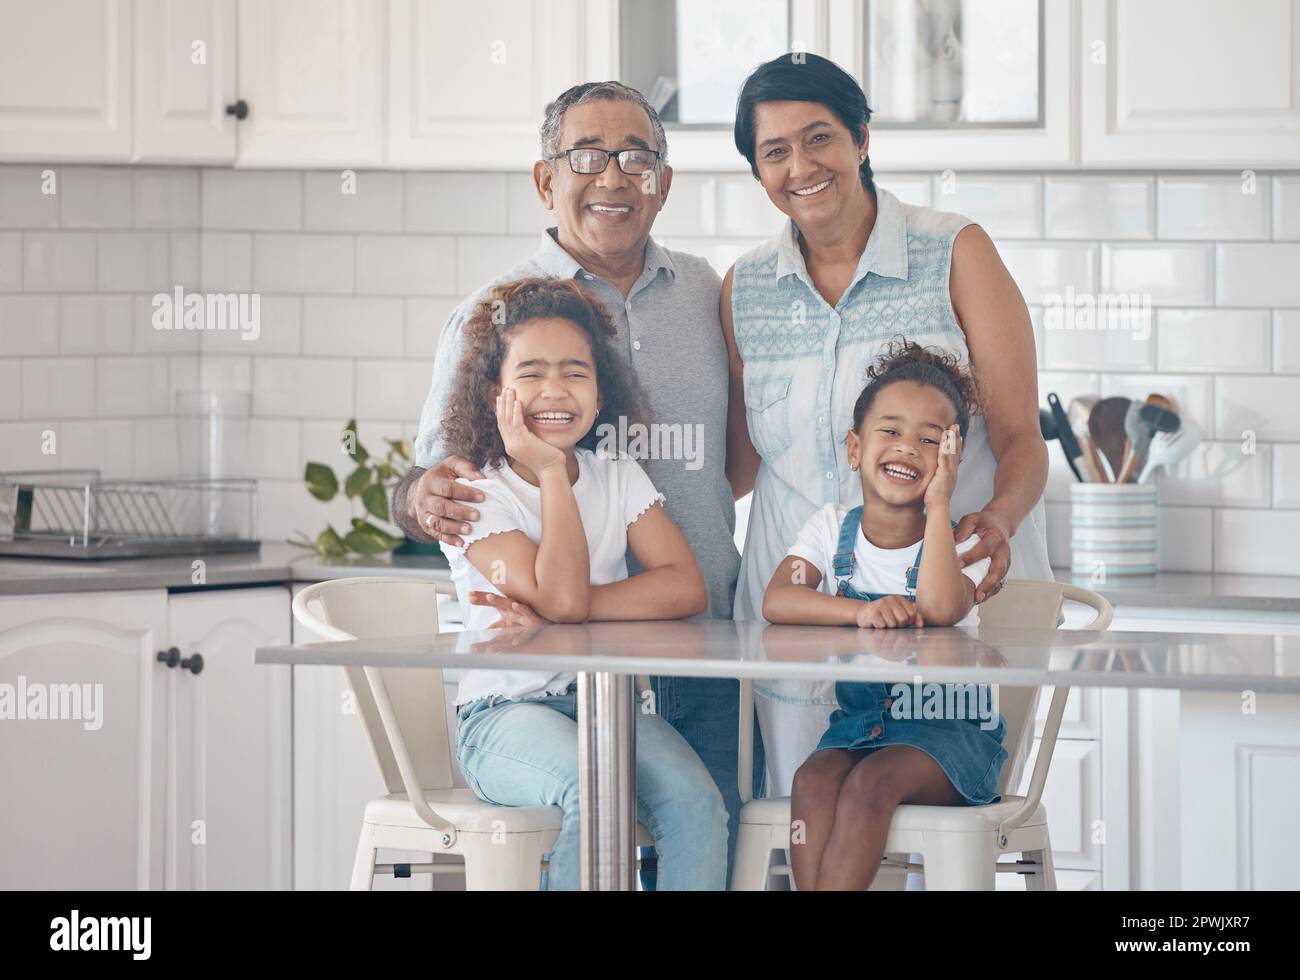 Love is all around us. grandparents spending time with their grandchildren Stock Photo